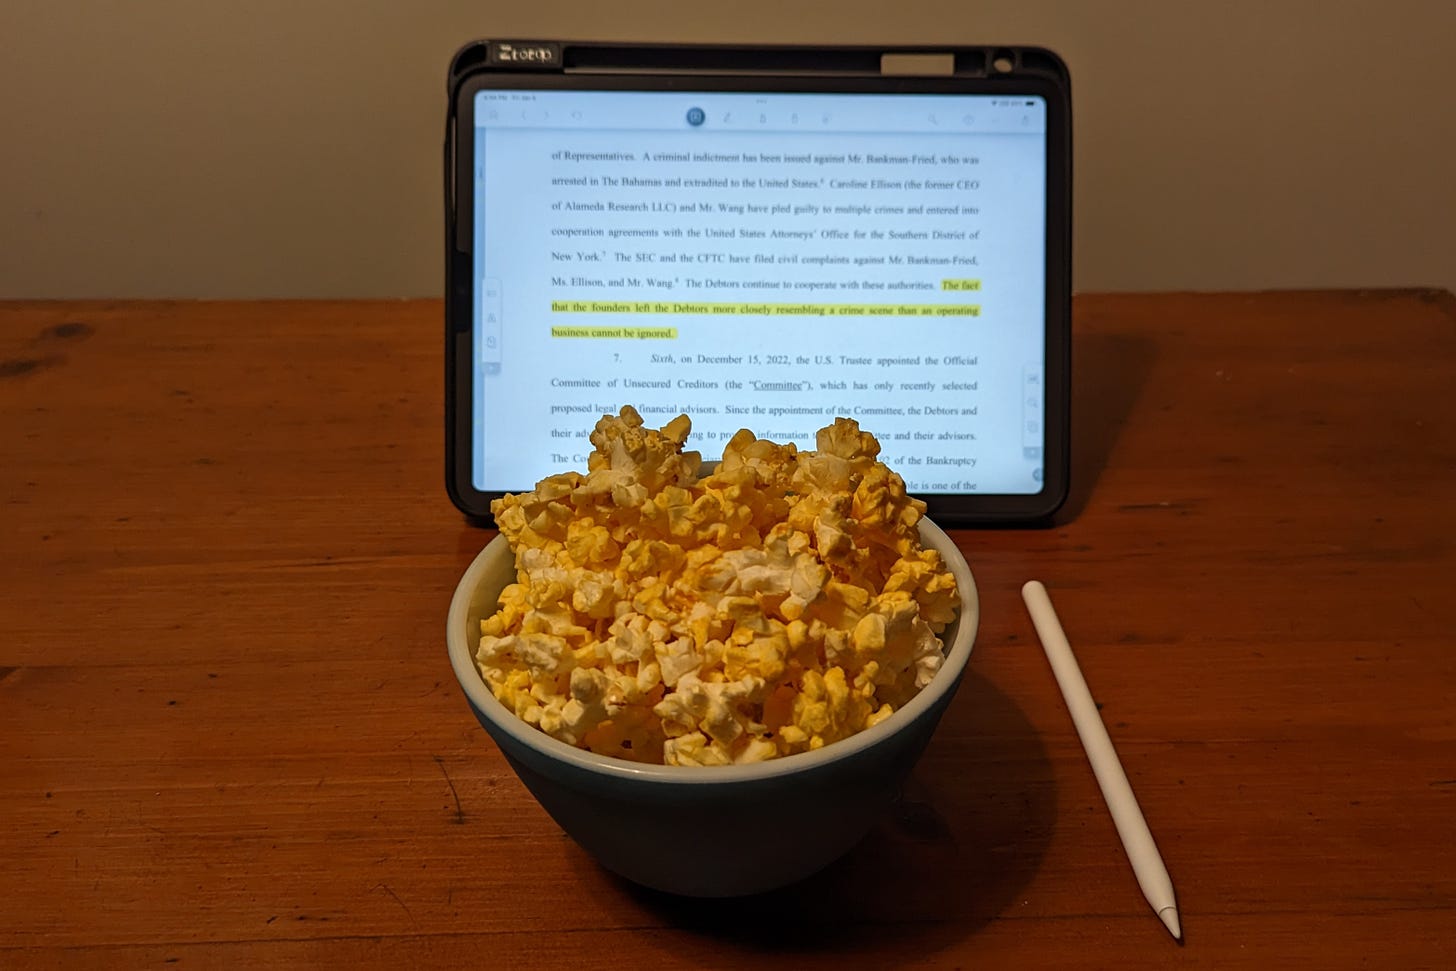 A bowl of popcorn placed in front of an iPad, which displays a PDF of a legal filing with some highlighted text.